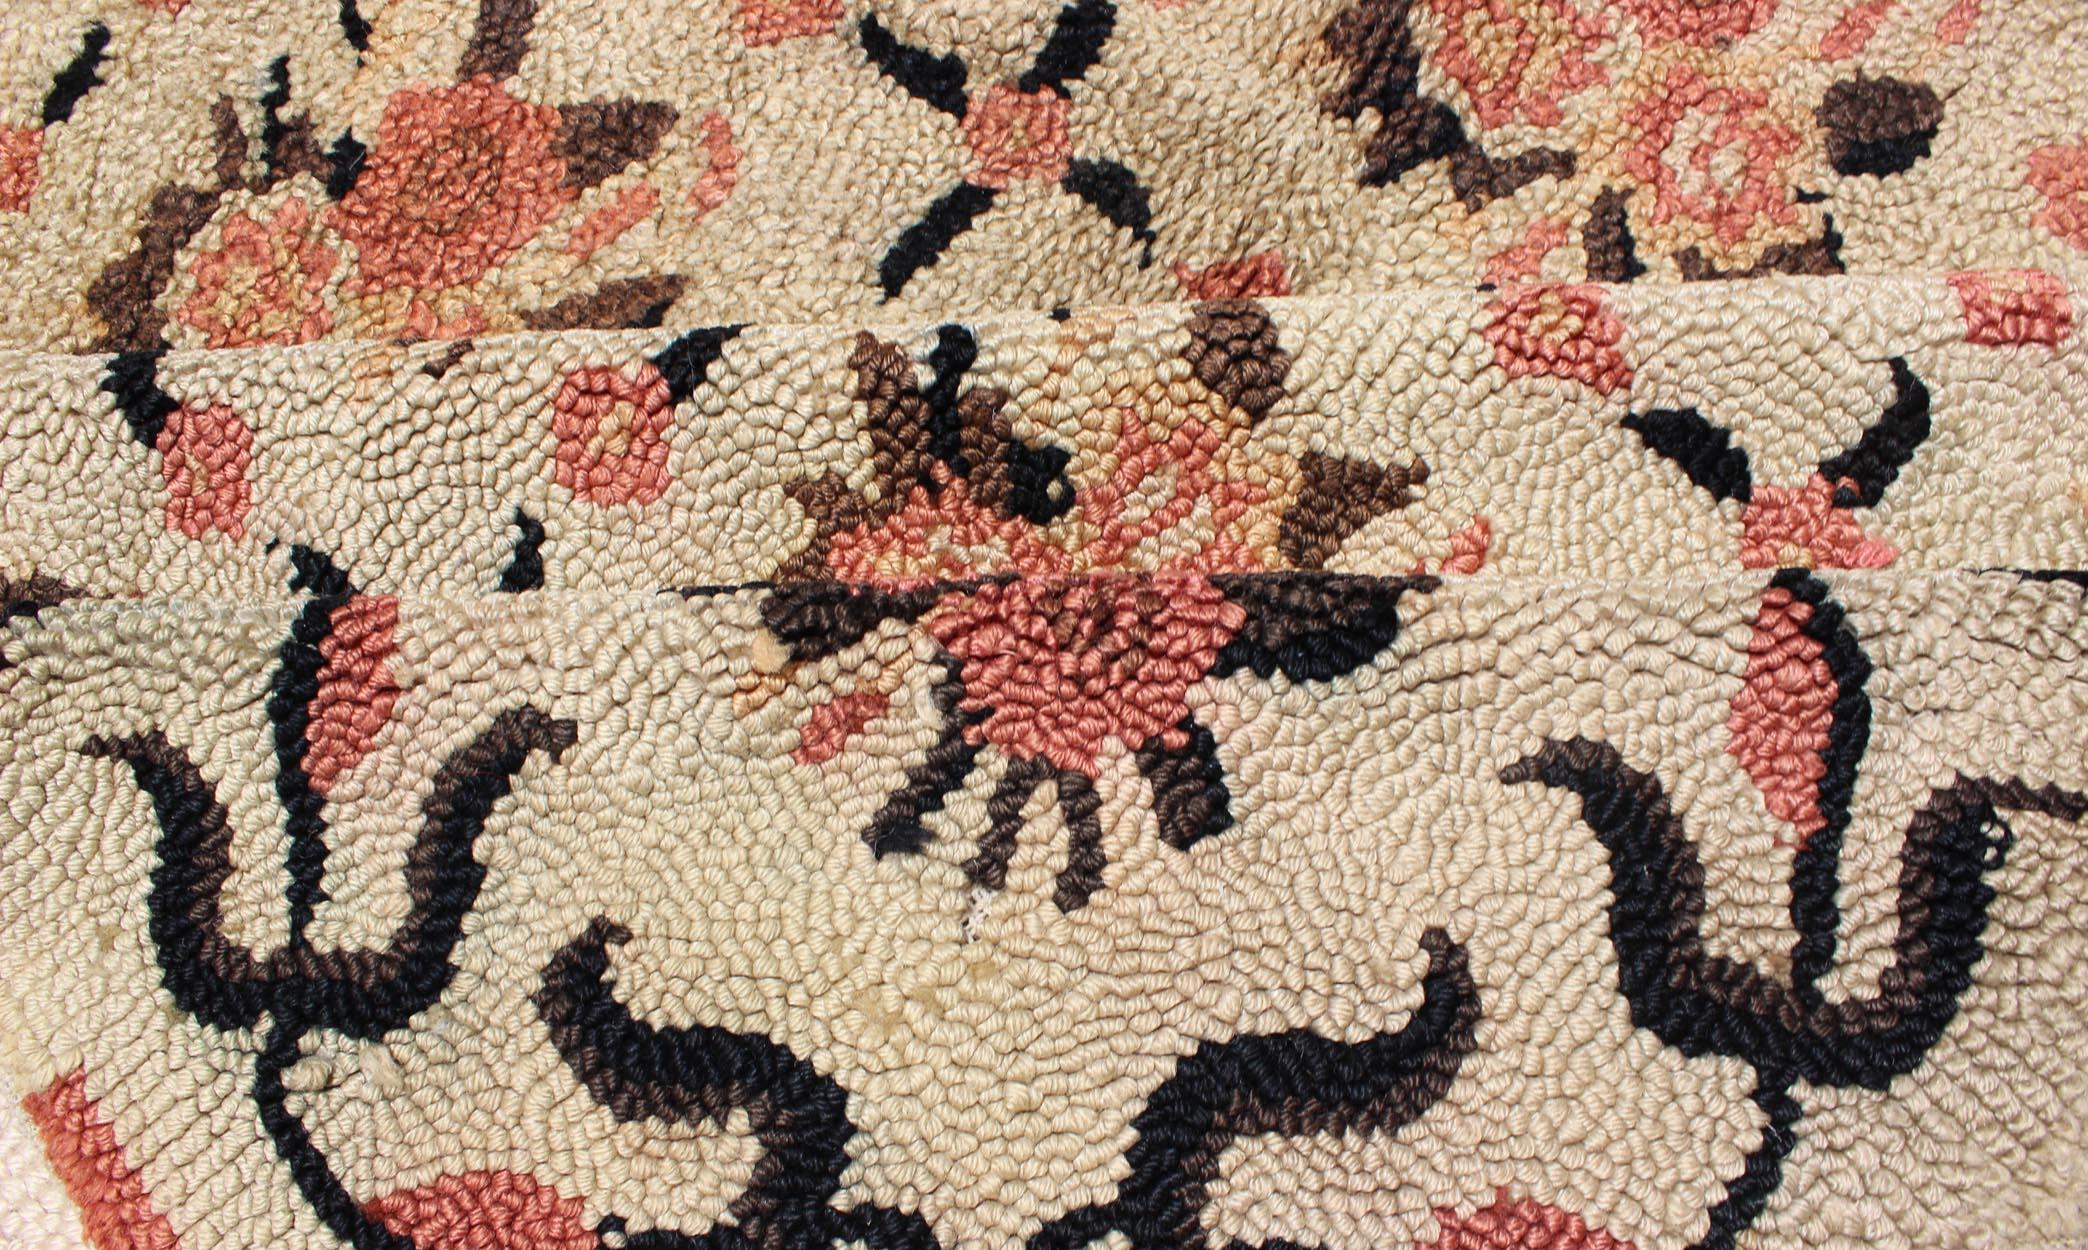 Mid-20th Century Vintage American Hooked Rug with All-Over Checkered Pattern of Floral Bouquets